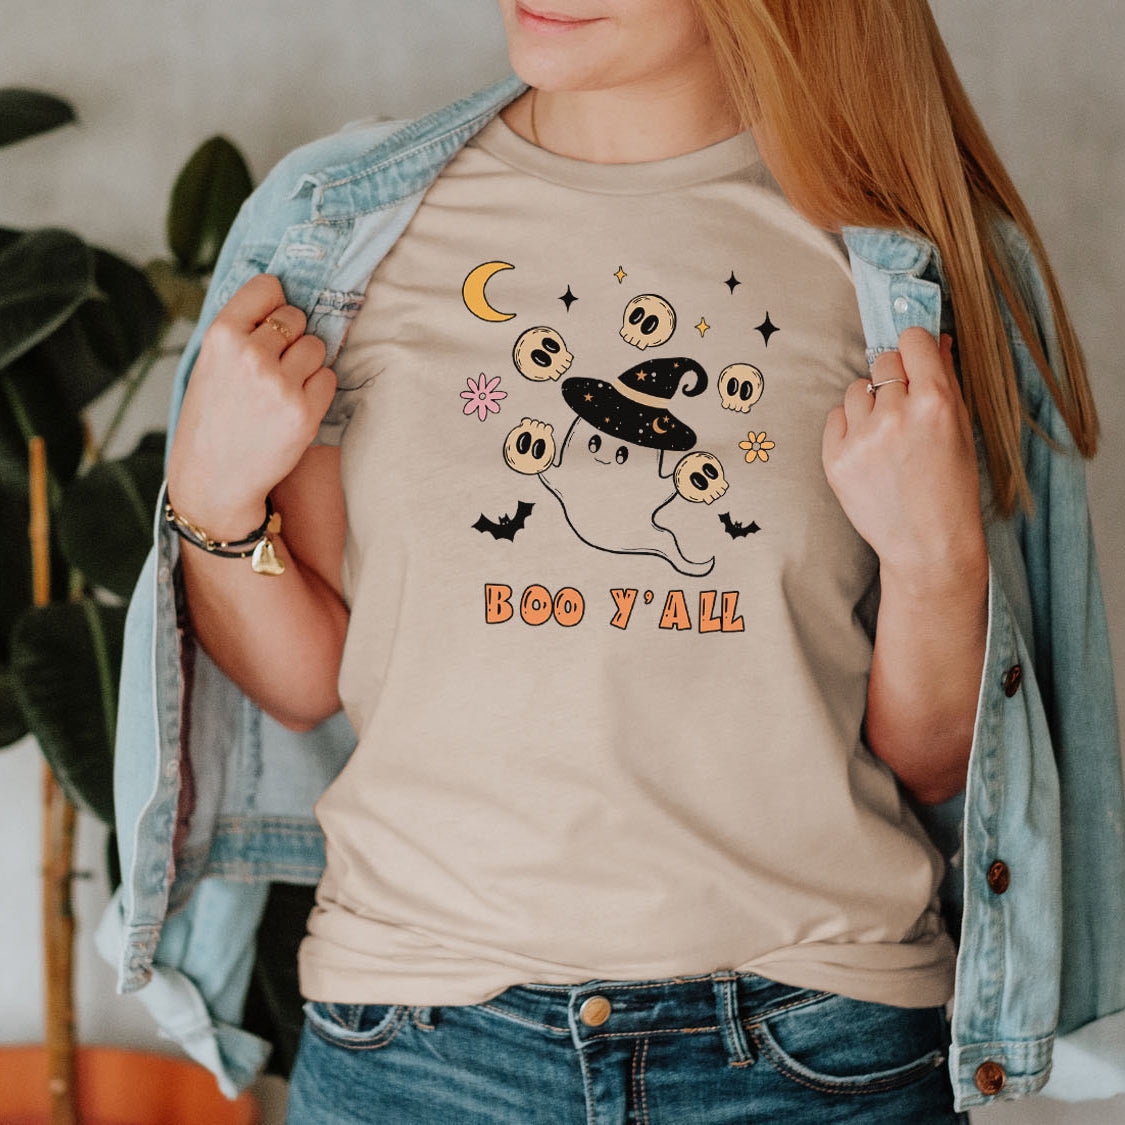 Halloween Cute Witch Ghost Boo Y'ALL T-shirt - Halloween Ghost Witch Retro Vintage Design Printed Tee Shirt